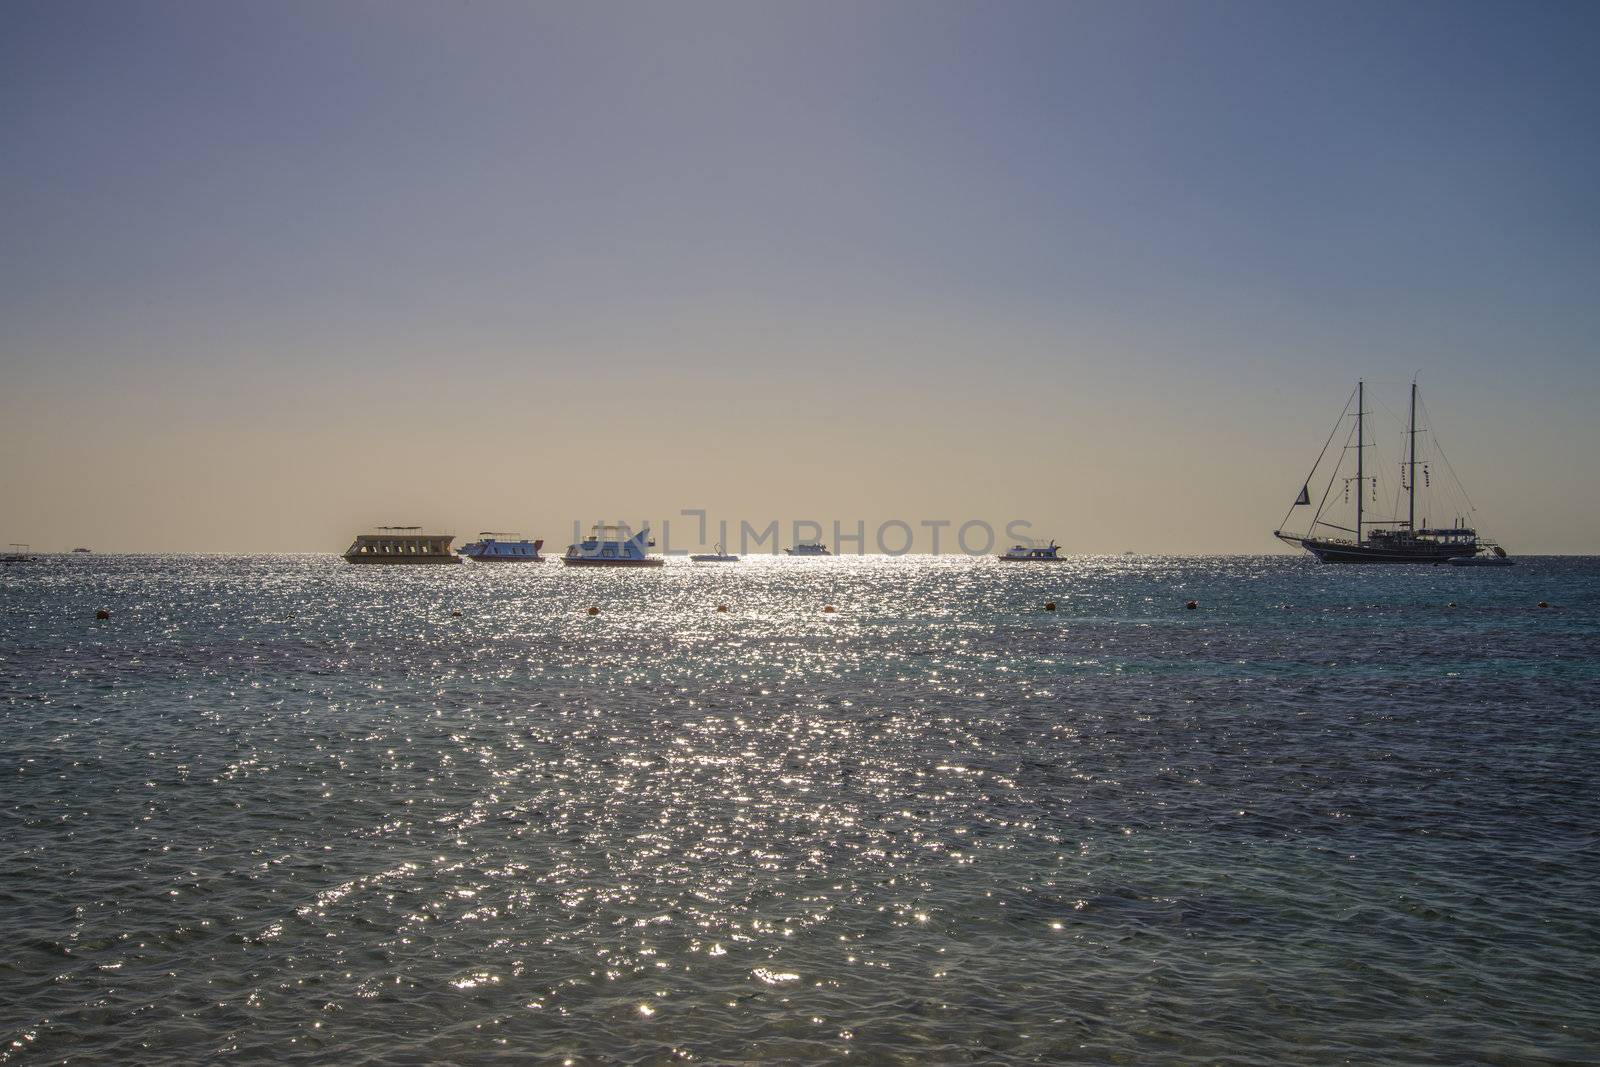 if you shall vacation in naama bay, sharm el sheikh, egypt so take a trip with one of the glass boats, the trip takes about an hour and it is an amazing sight when the boat is sailing over coral reefs in the bay.